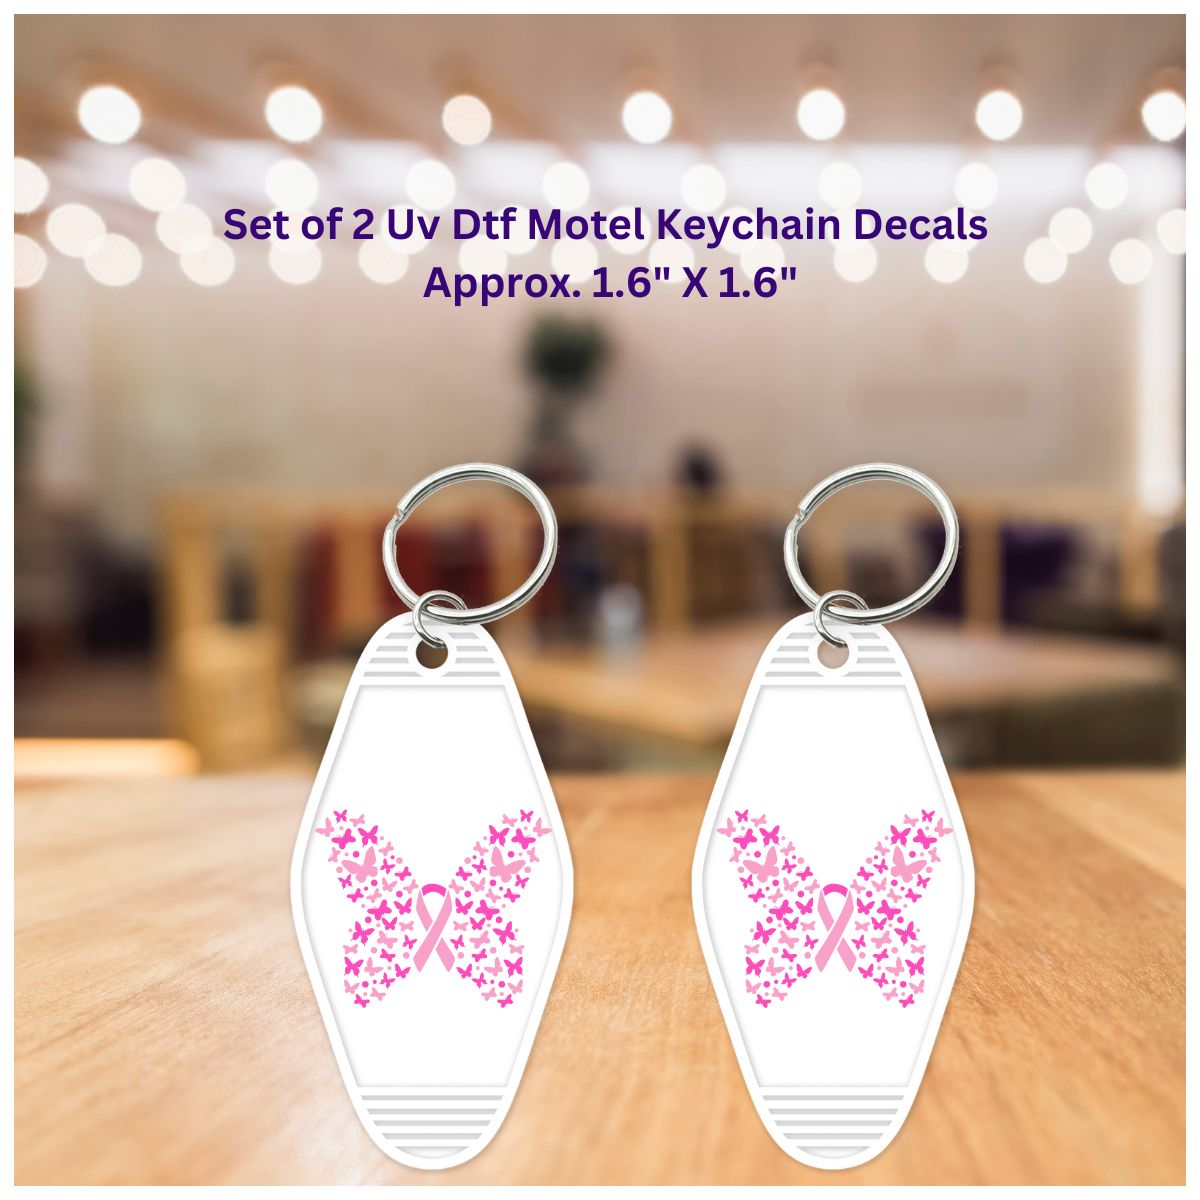 Uv Dtf Decal Set of 2 Motel Keychain Stickers Breast Cancer Awareness Pink Butterfly Heart